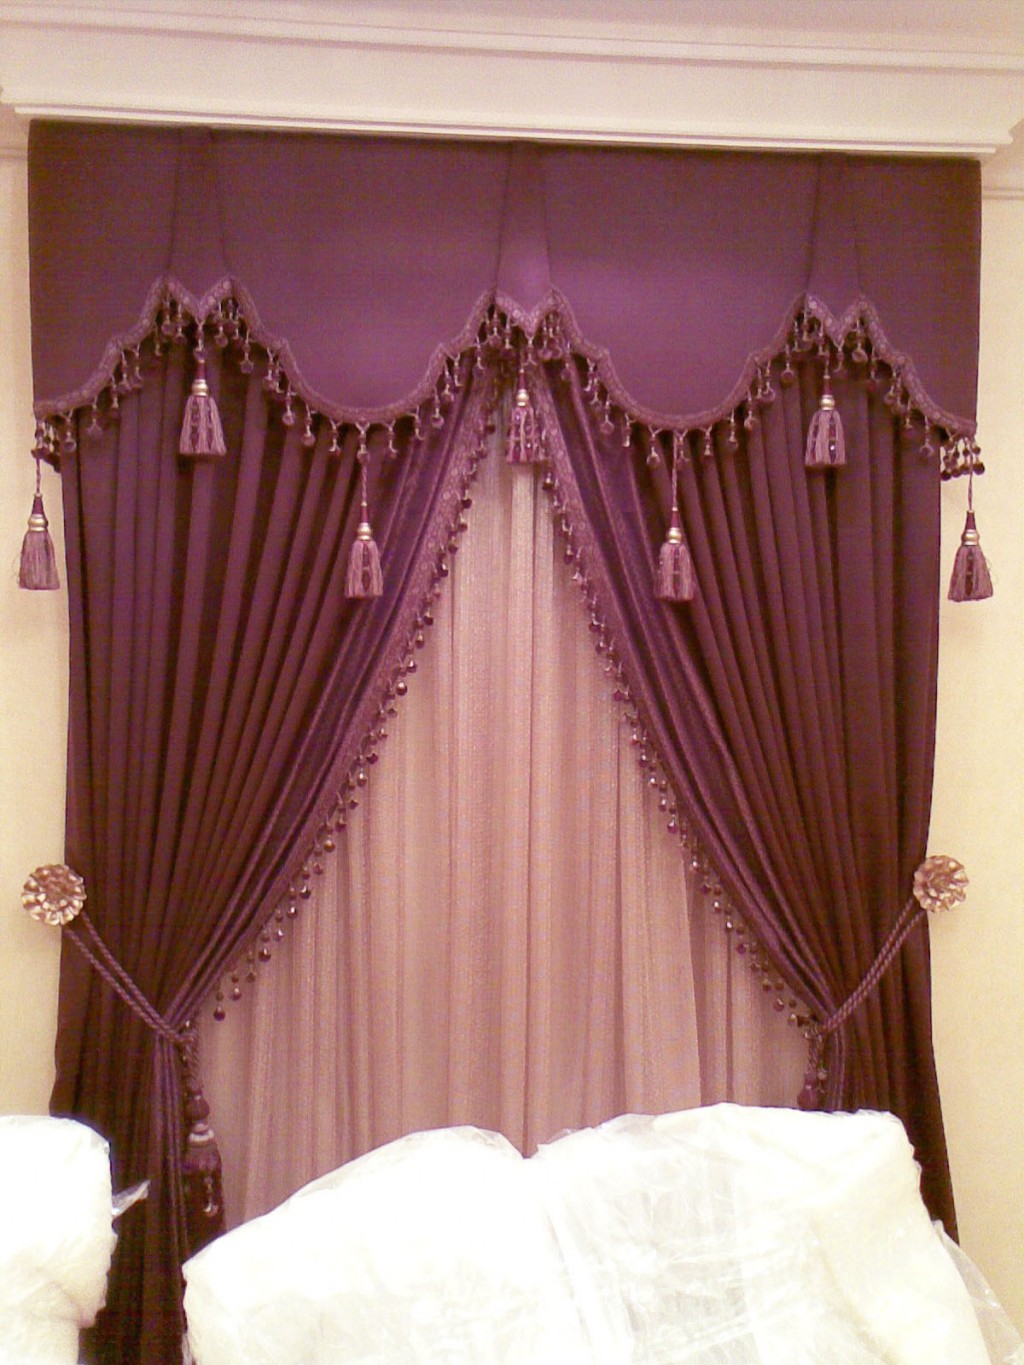 Customized Curtains in Curtain